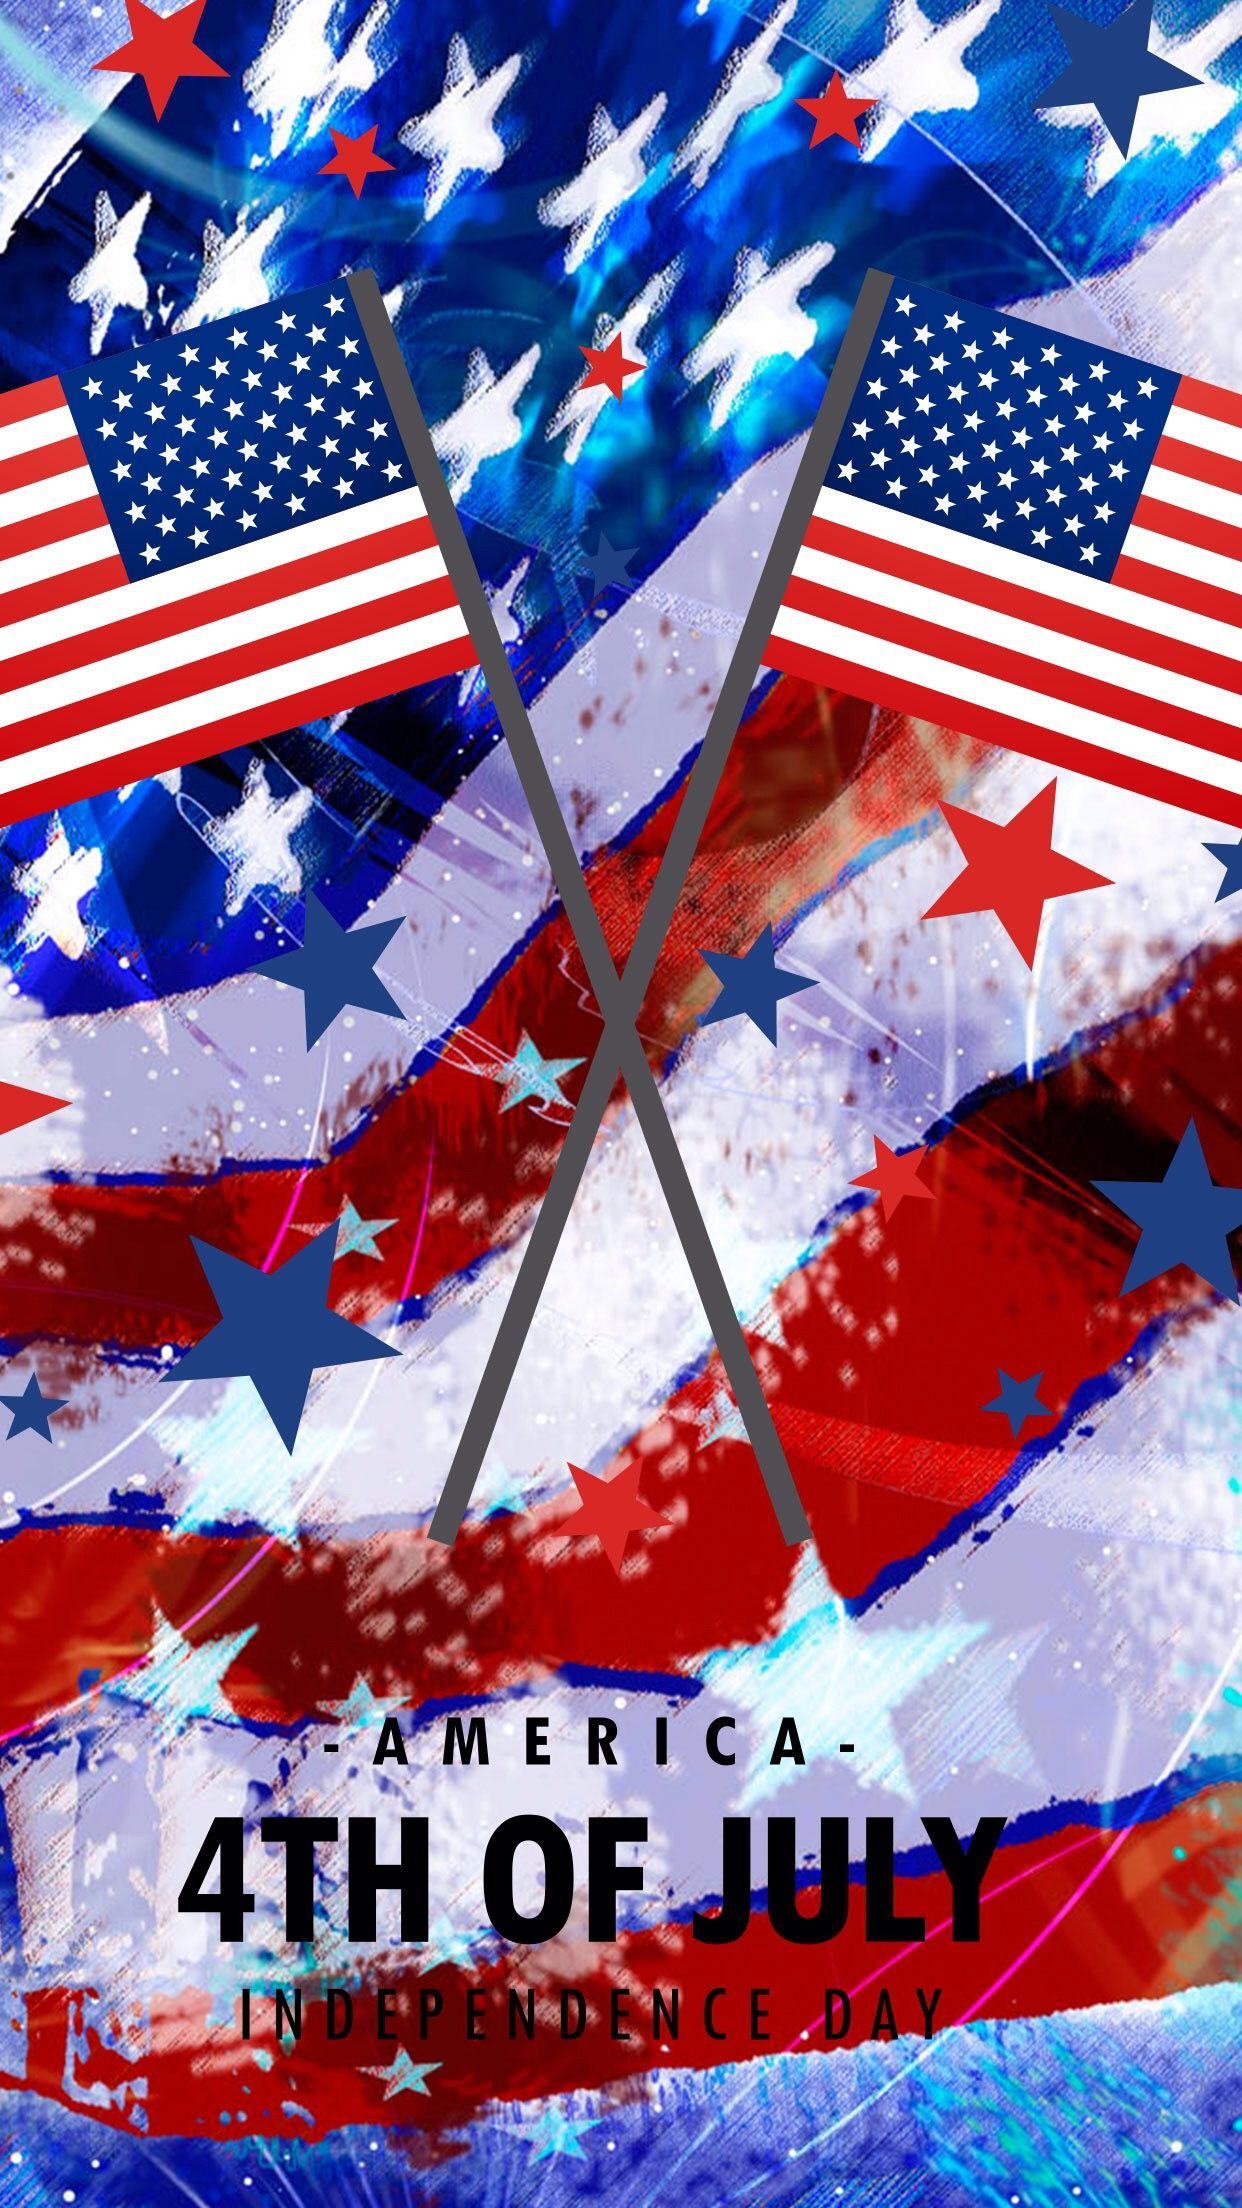 Patriotic Birthday Images Wallpapers